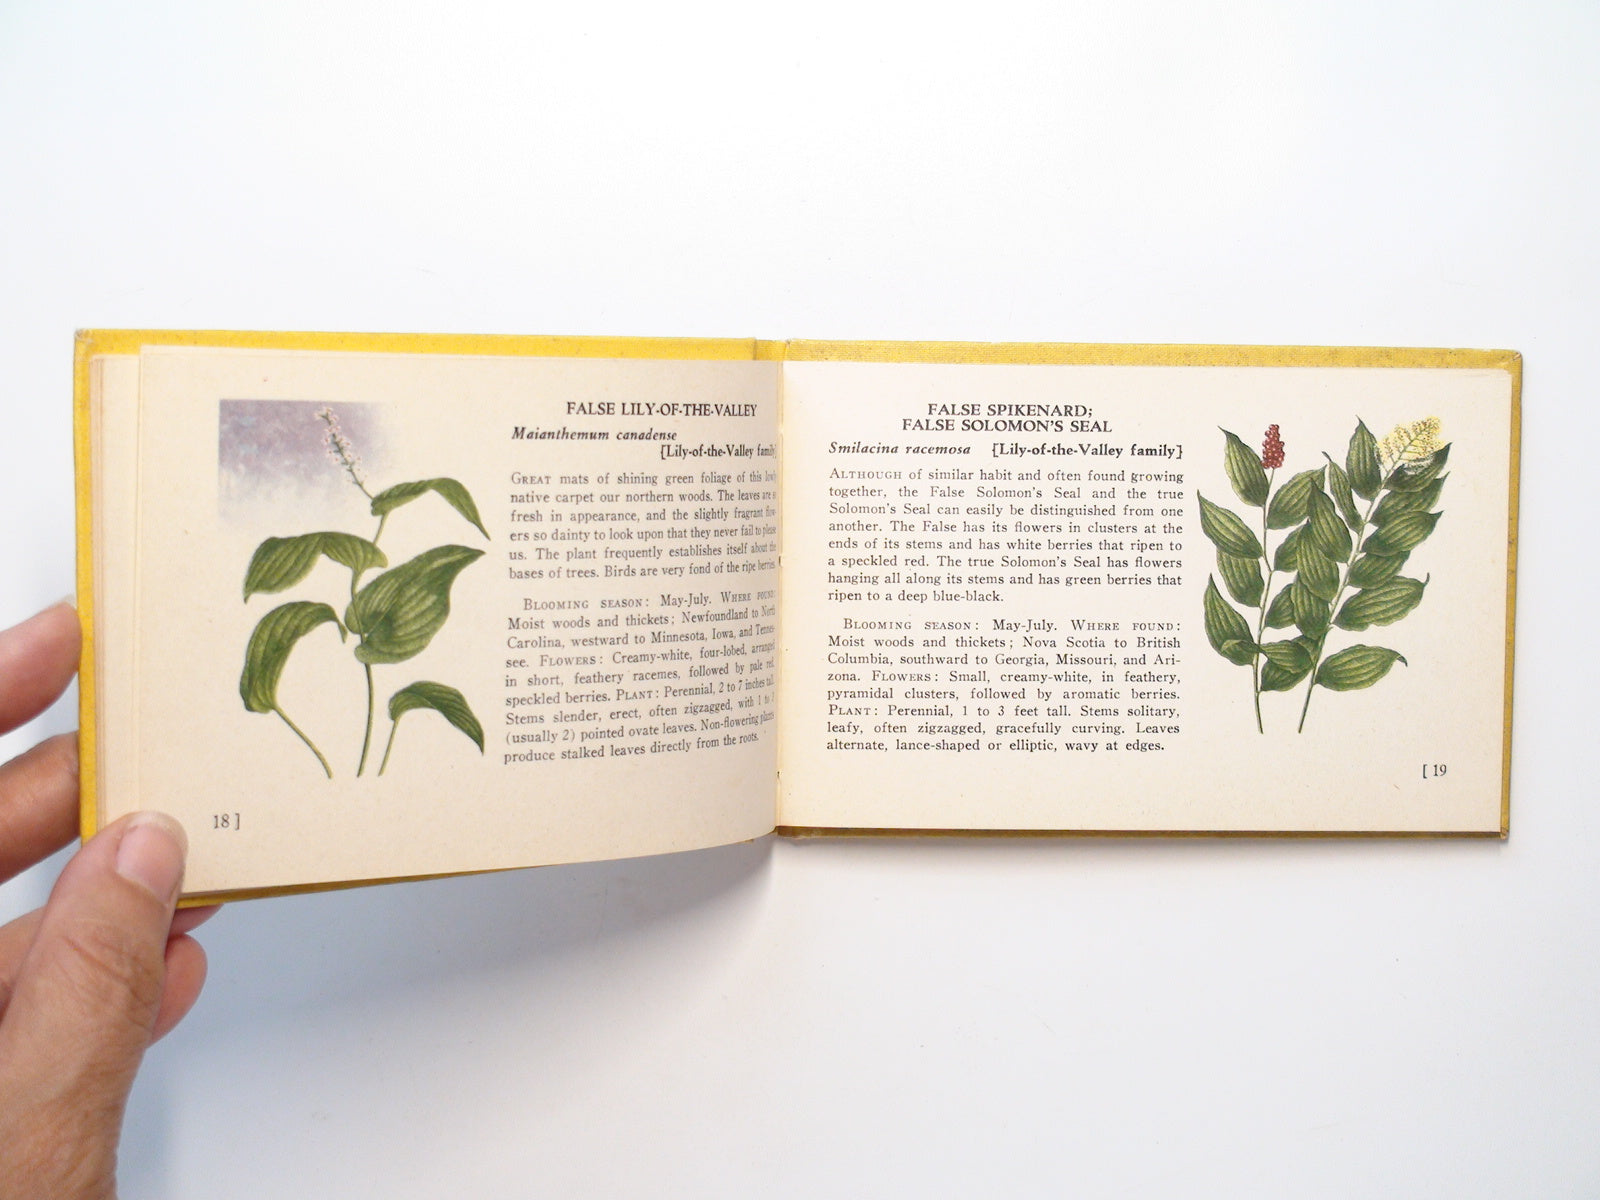 A Guide to Wild Flowers, Woodland Flowers, by T. H. Everett, Illustrated, 1945